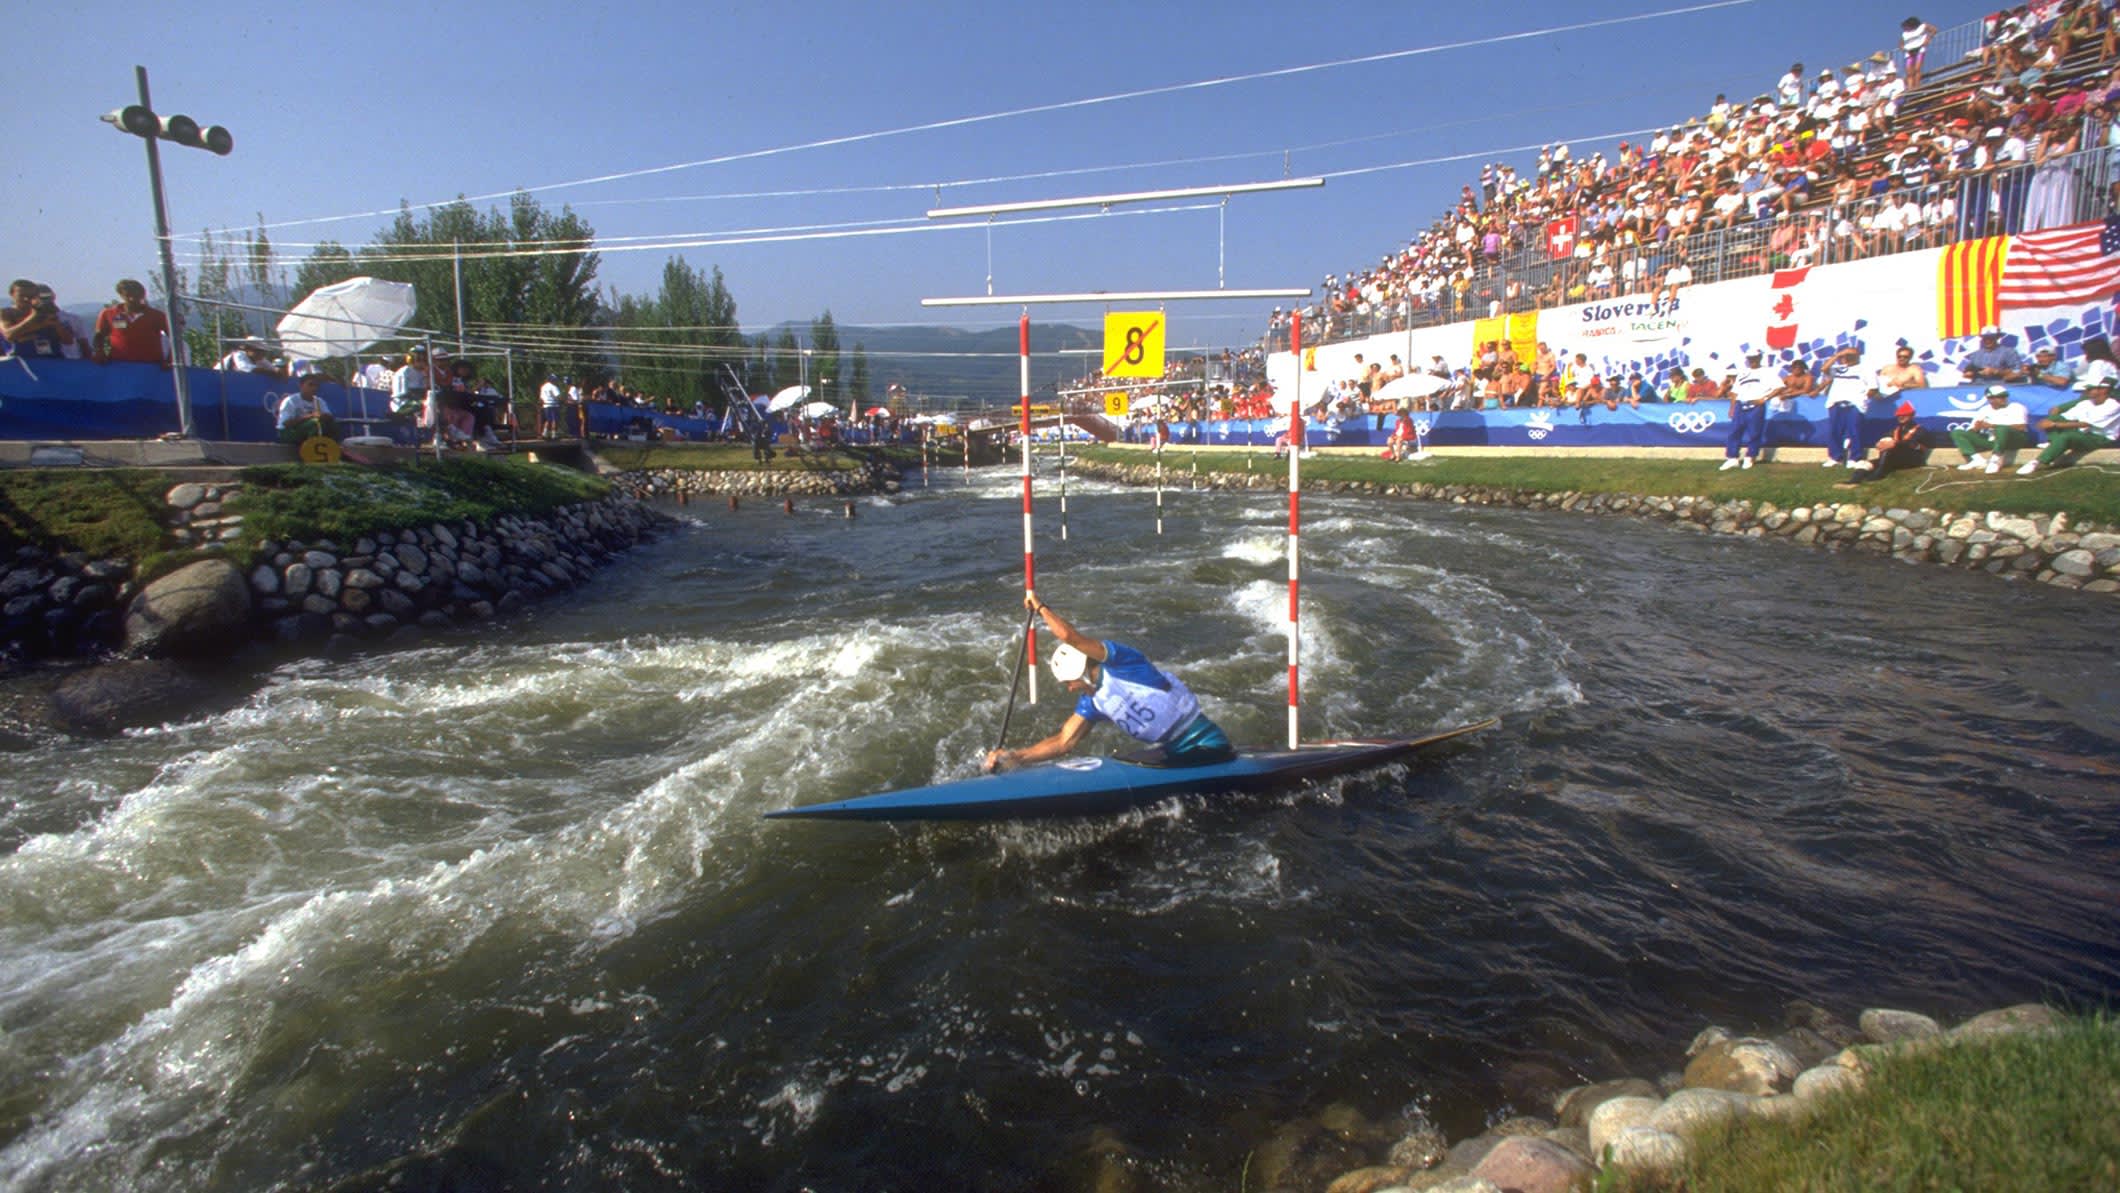 Lukas Pollert of czechoslovakia maneuvers through a gate during the c1 canoeing white water slalom competition at the 1992 Barcelona Olympics